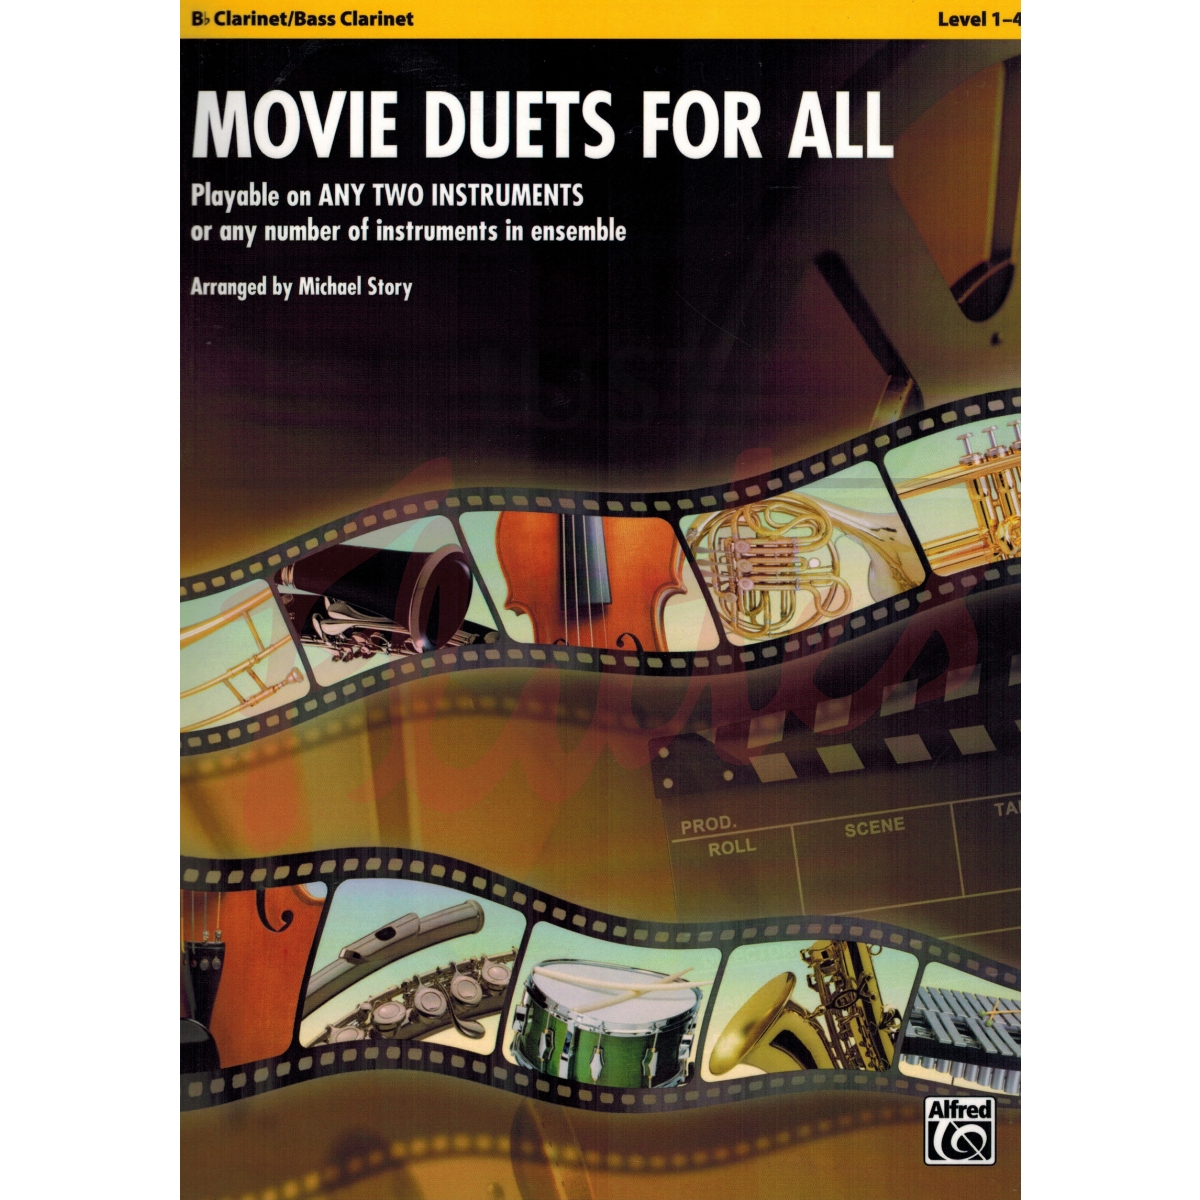 Movie Duets for All [Clarinet]